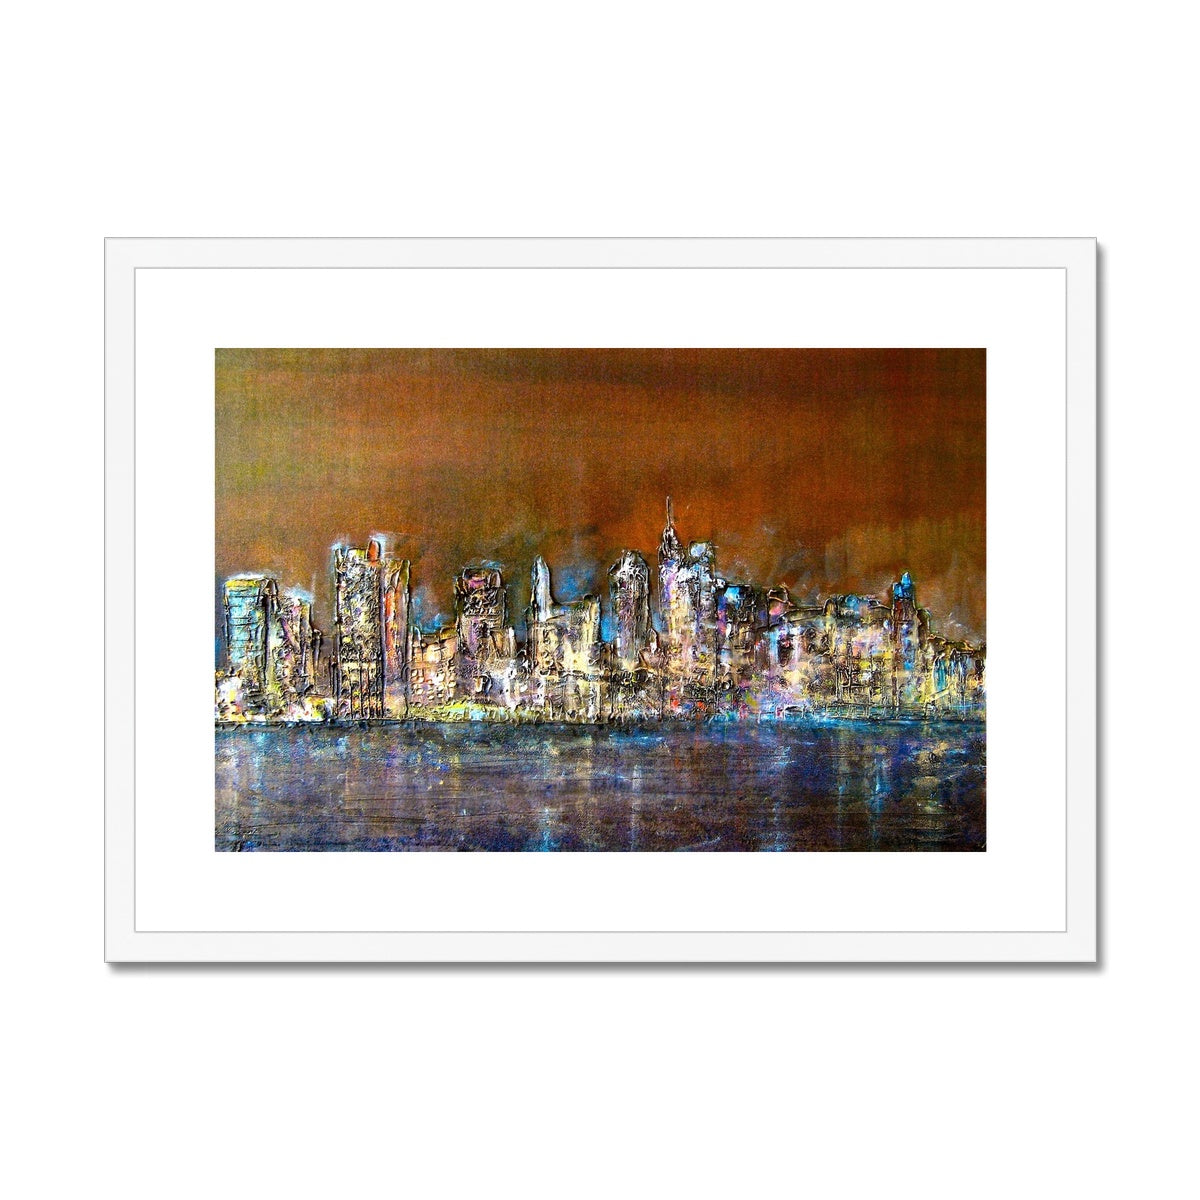 Manhattan Nights Painting | Framed & Mounted Prints From Scotland-Framed & Mounted Prints-World Art Gallery-A2 Landscape-White Frame-Paintings, Prints, Homeware, Art Gifts From Scotland By Scottish Artist Kevin Hunter